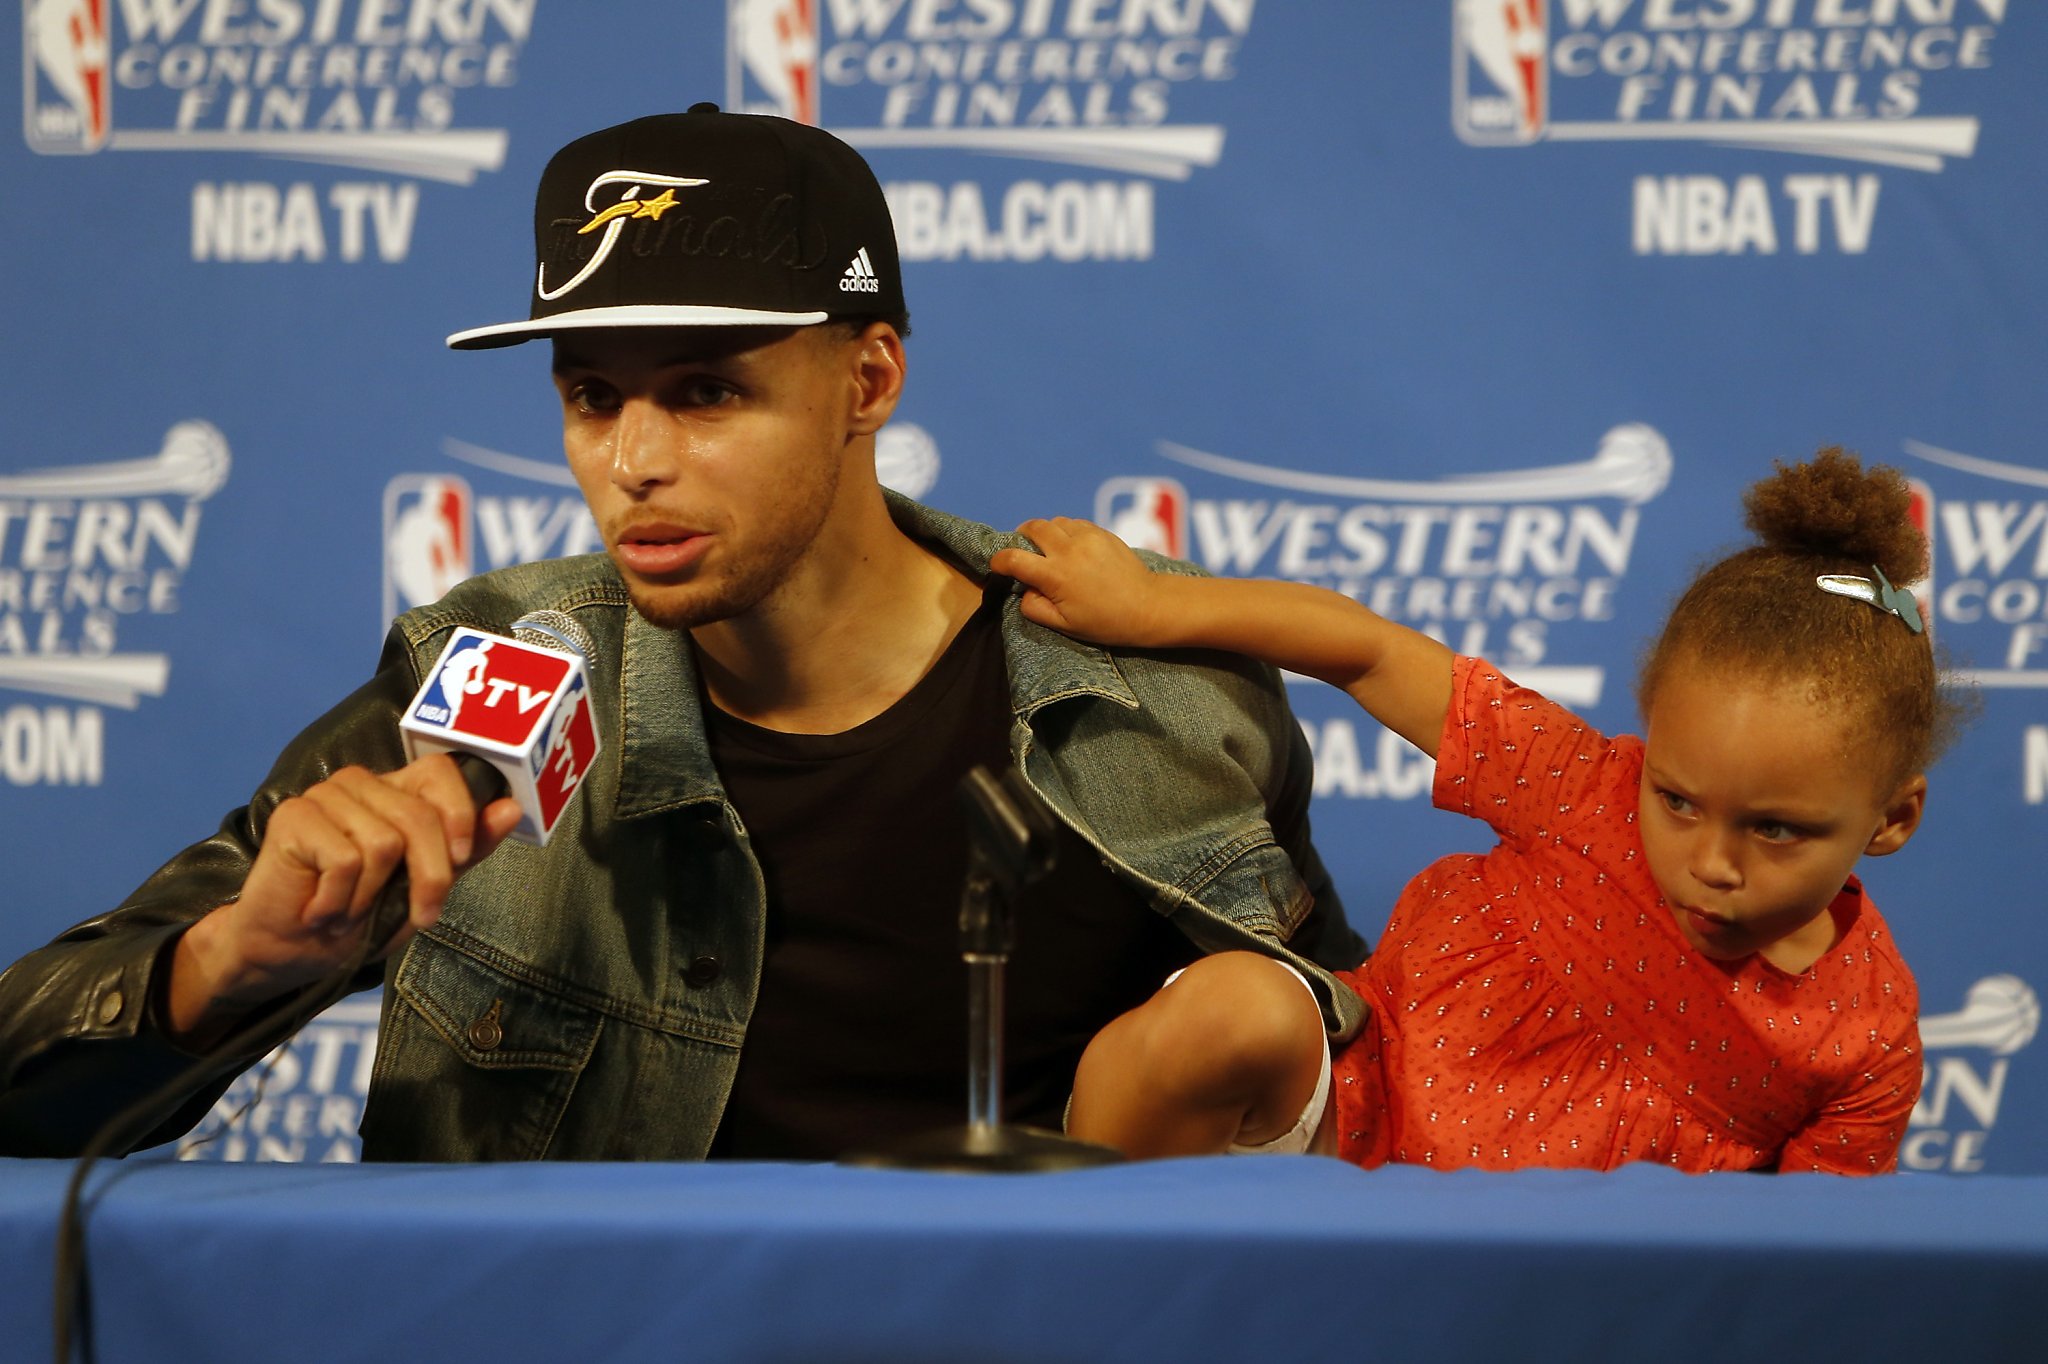 June 4, 2015: Riley Curry and the Super Important Press Conference